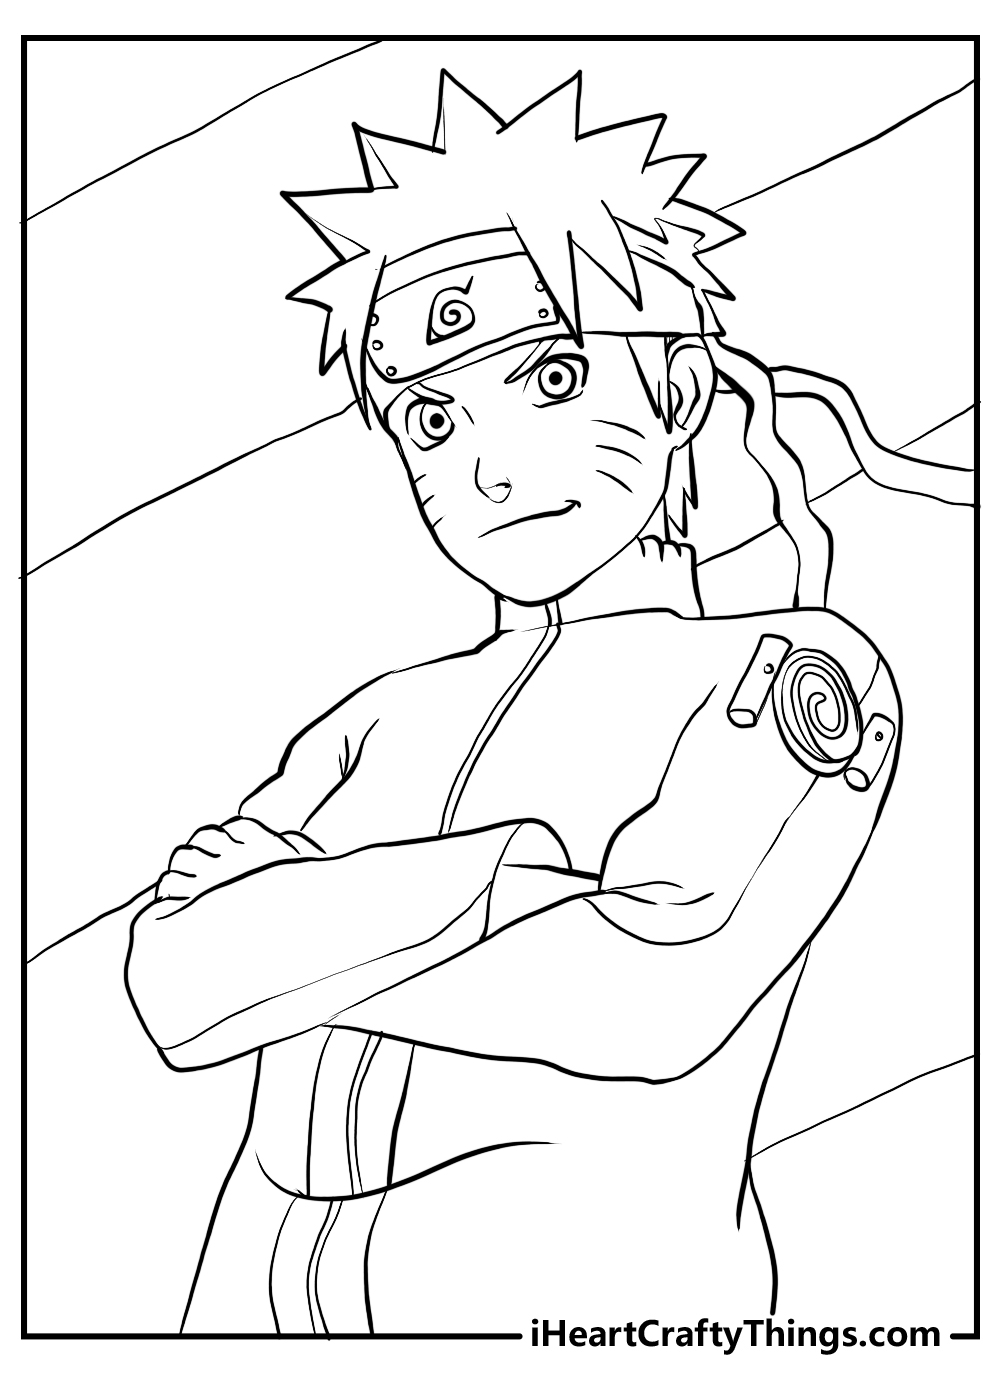 Naruto color page - Fun coloring pages for kids to print